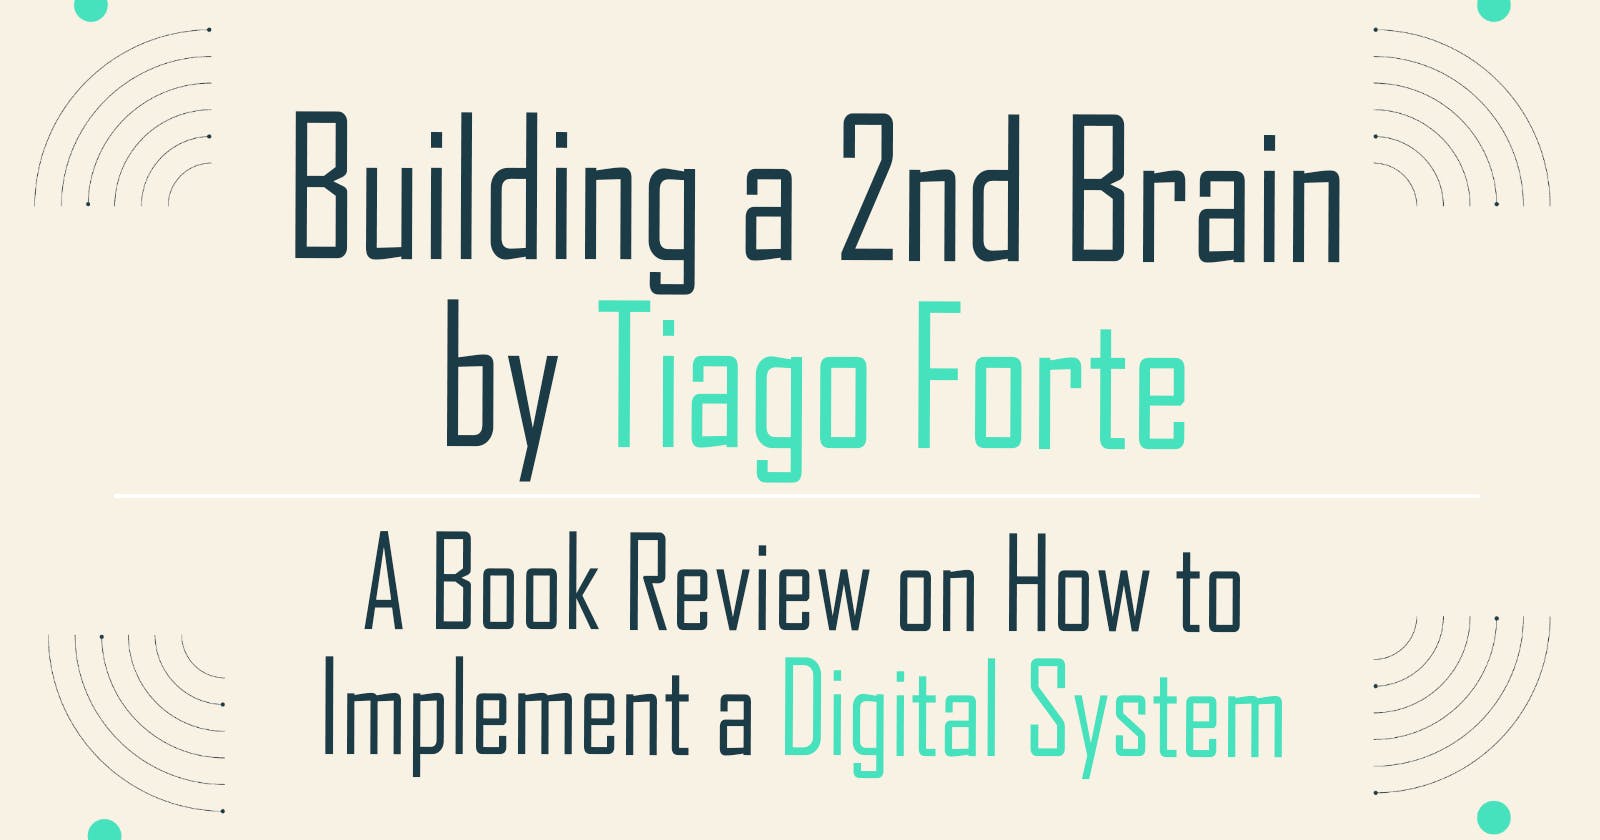 Building a 2nd Brain by Tiago Forte: How to Implement a Digital System